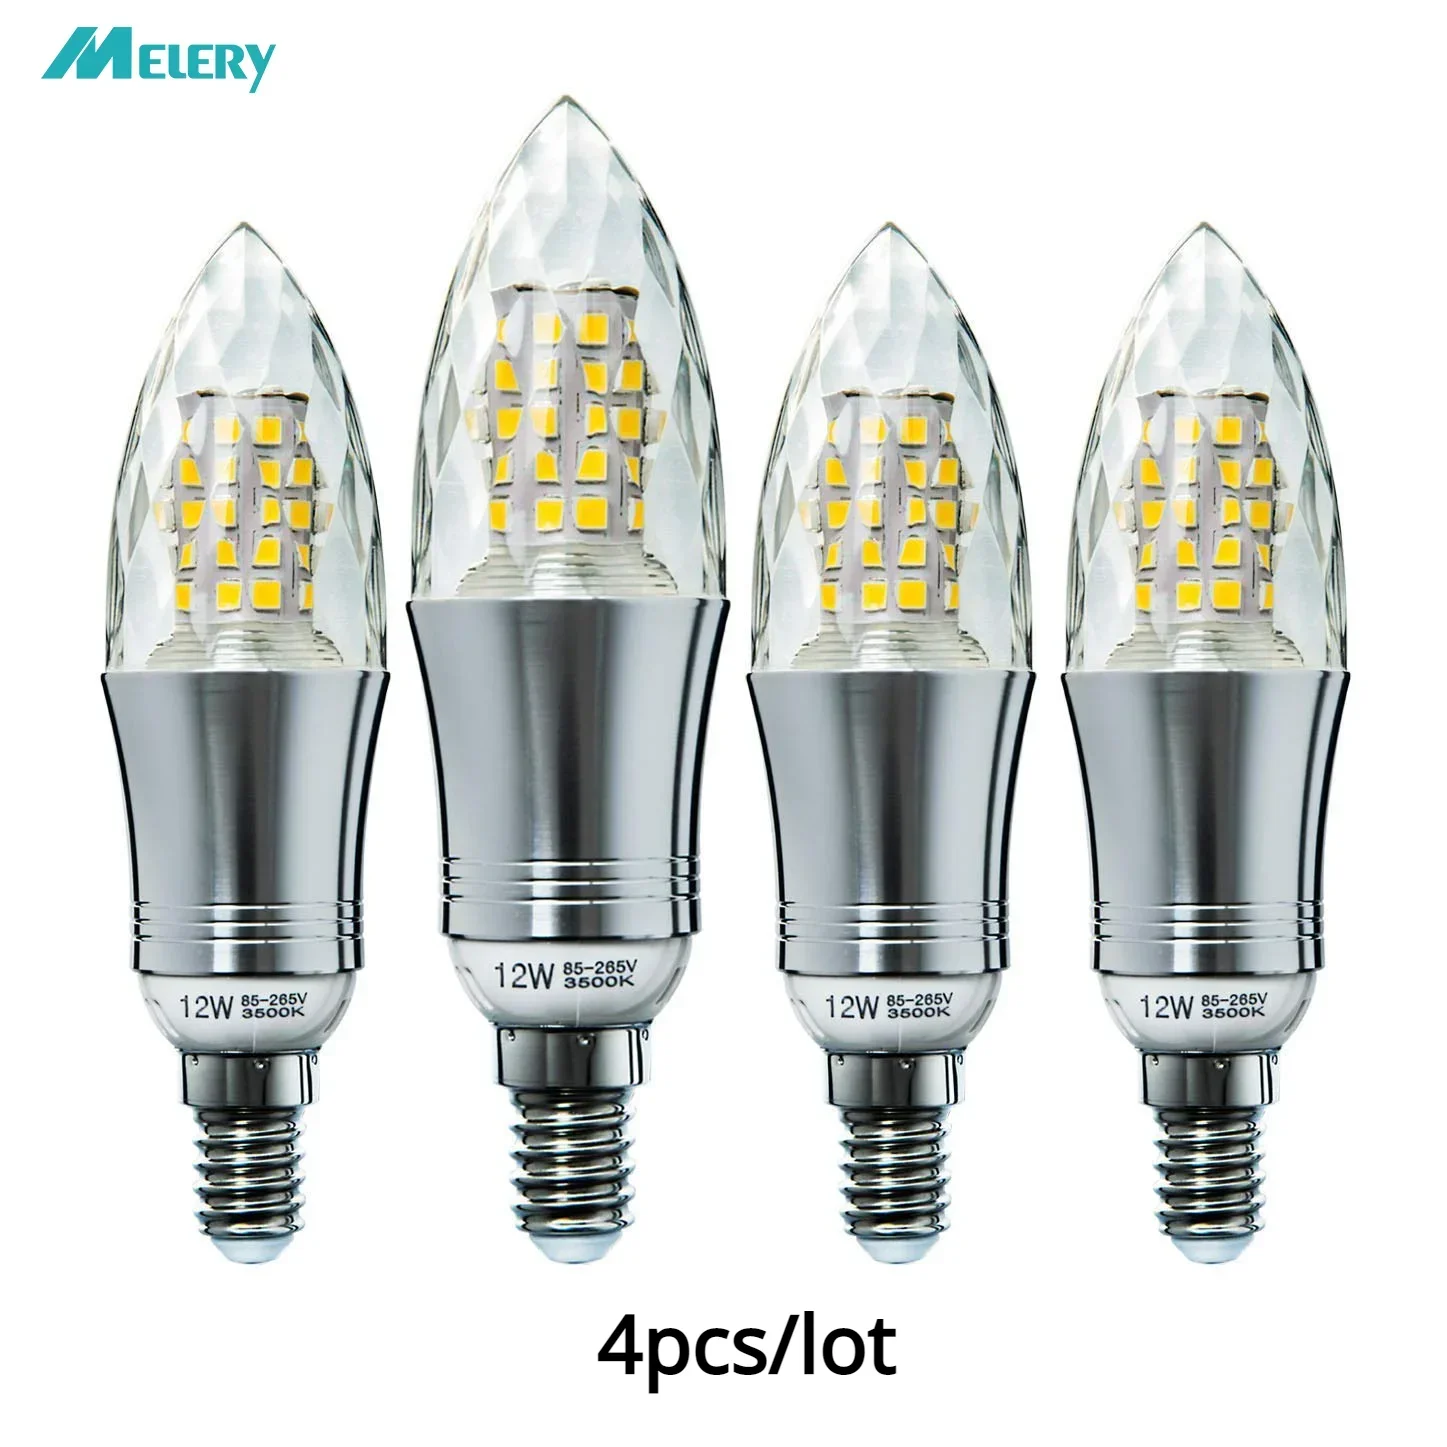 

E14 LED Light Candle Bulbs Lamp 12W Equivalent 100W 3500K Warm 6500K Cold White Candelabra SES 1200Lm [Energy Class A+] 4PACK